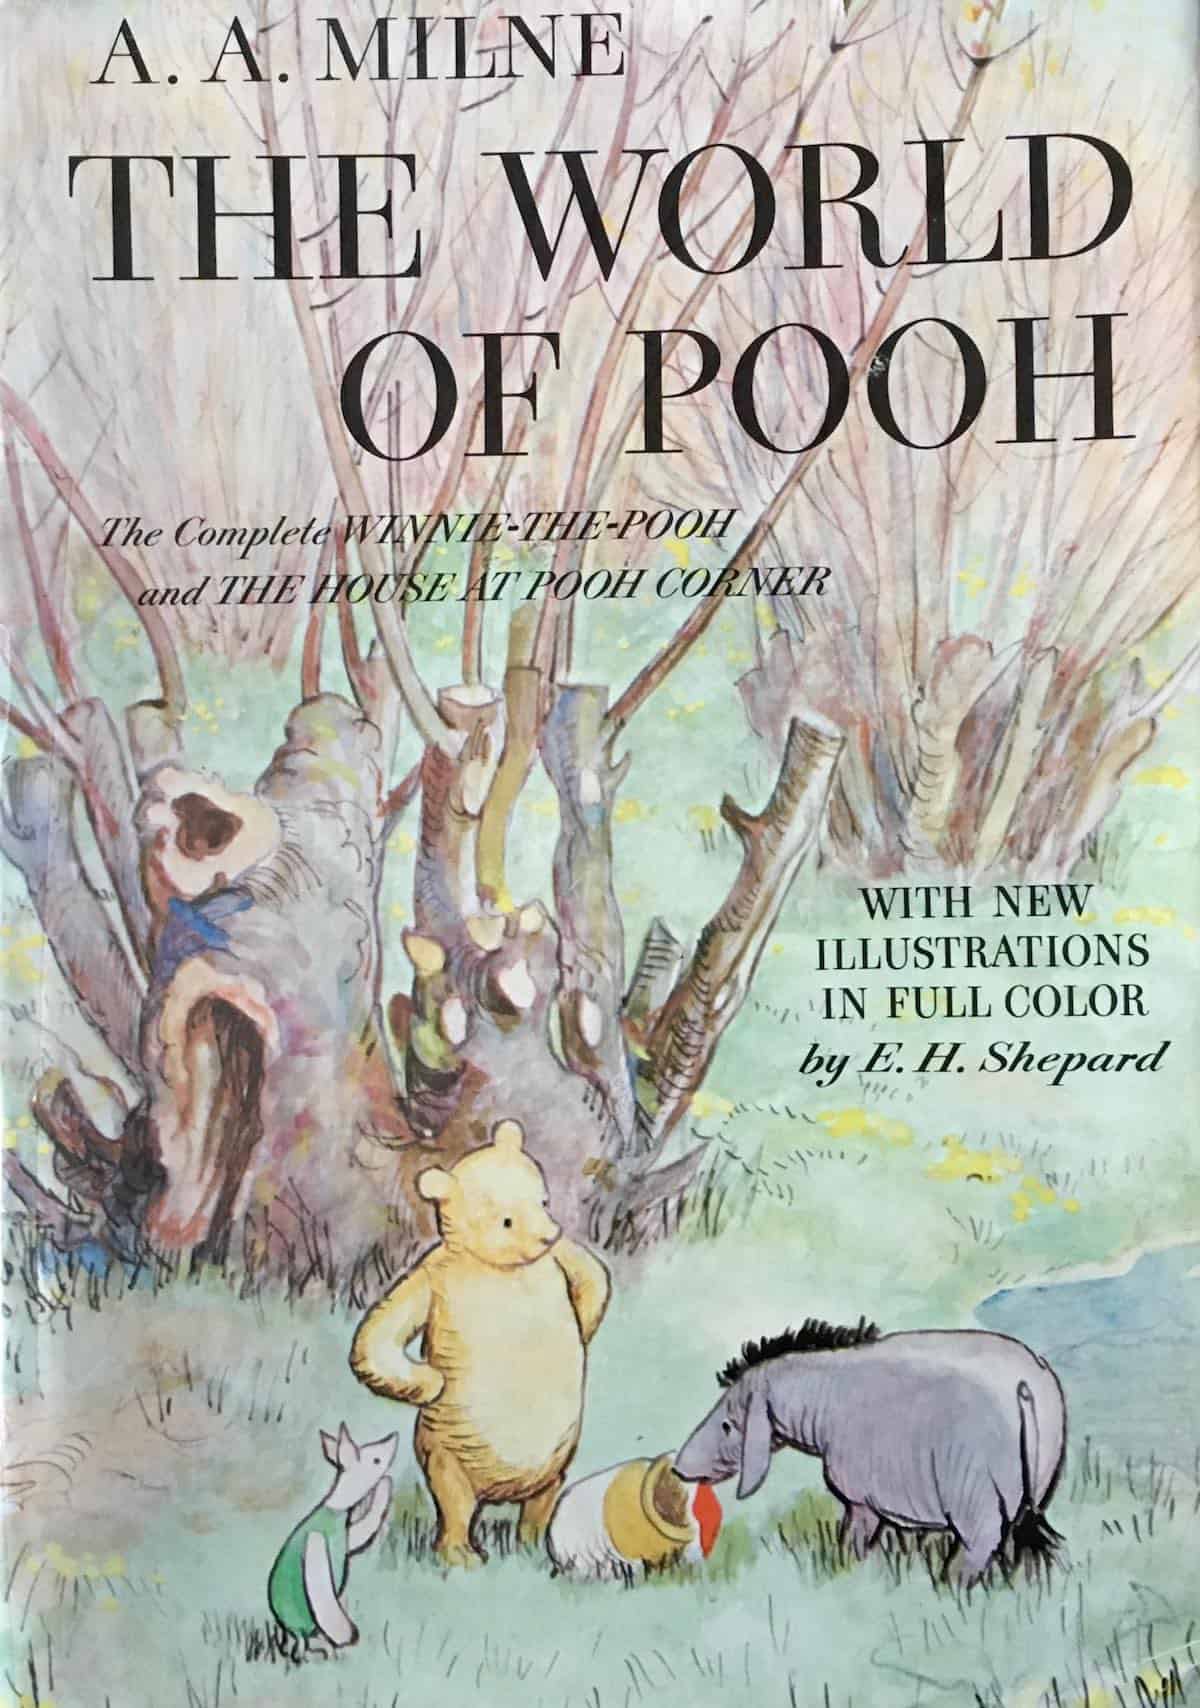 Winnie the Pooh book cover.